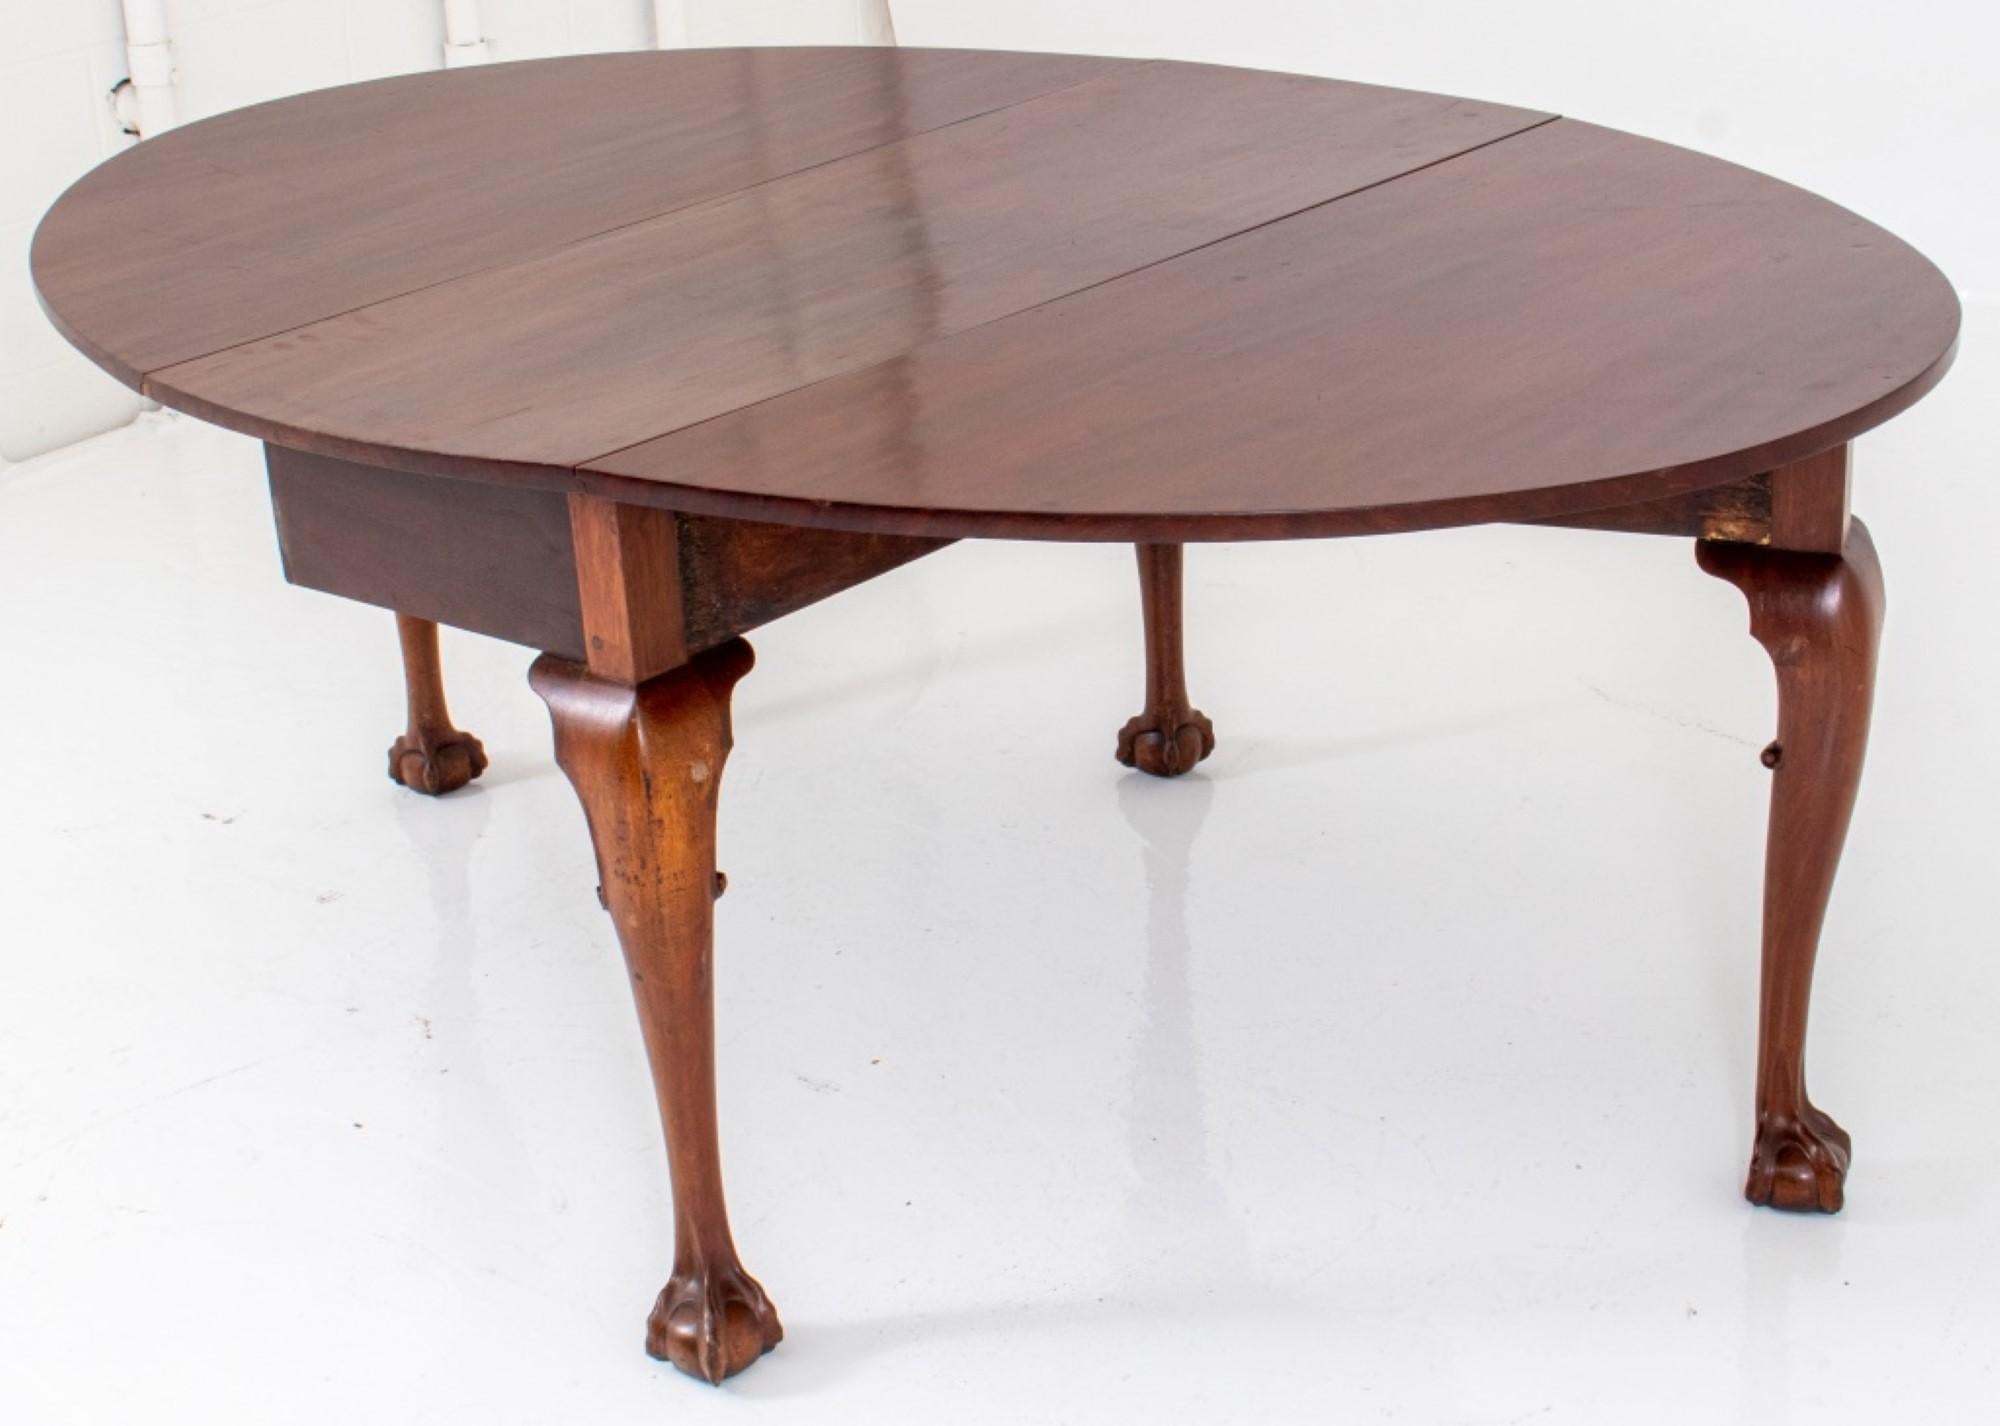 Queen Anne style mahogany drop-leaf gateleg table, of oval form, the table top above four cabriole legs terminating in claw-and-ball feet in the Philadelphia Chippendale taste.

27.5 inches in height, 47 inches in width, and 19.5 inches in depth